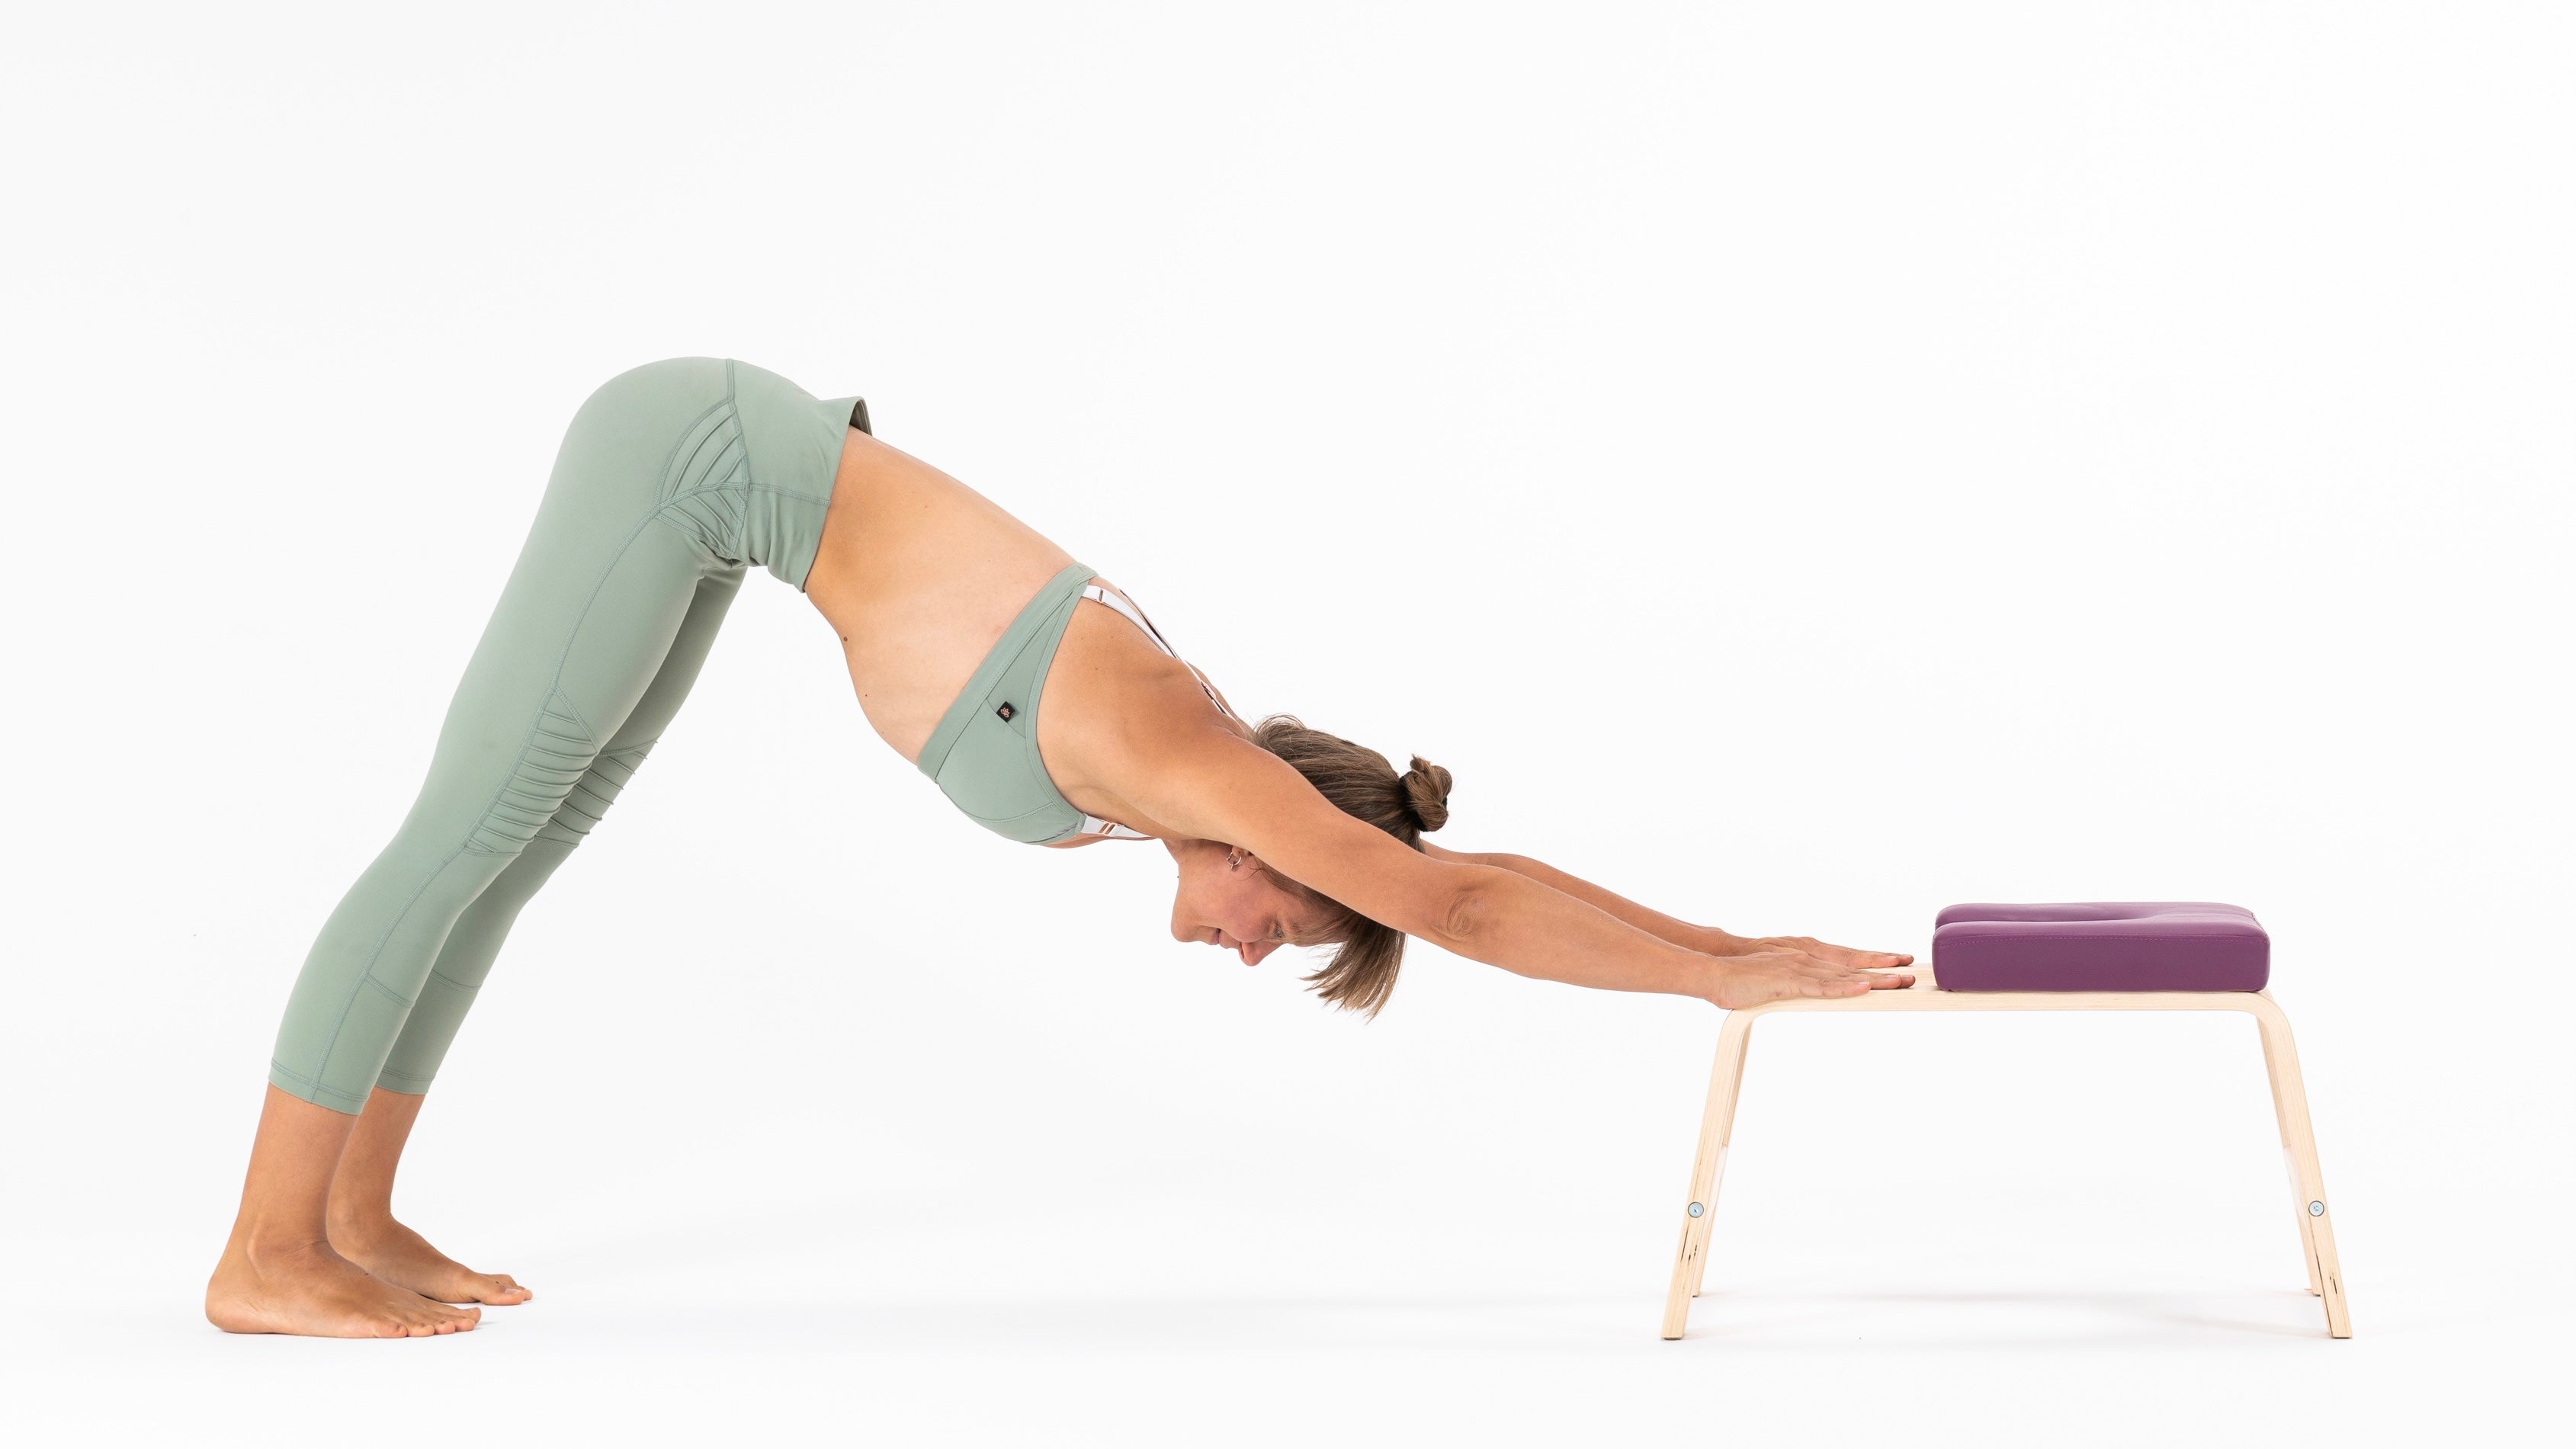 Wheel House - Why do Downward Facing Dog? Downward Facing Dog, or Adho  Mukha Svanasana, is one of the most commonly practiced and most iconic yoga  postures around. In fact, I would